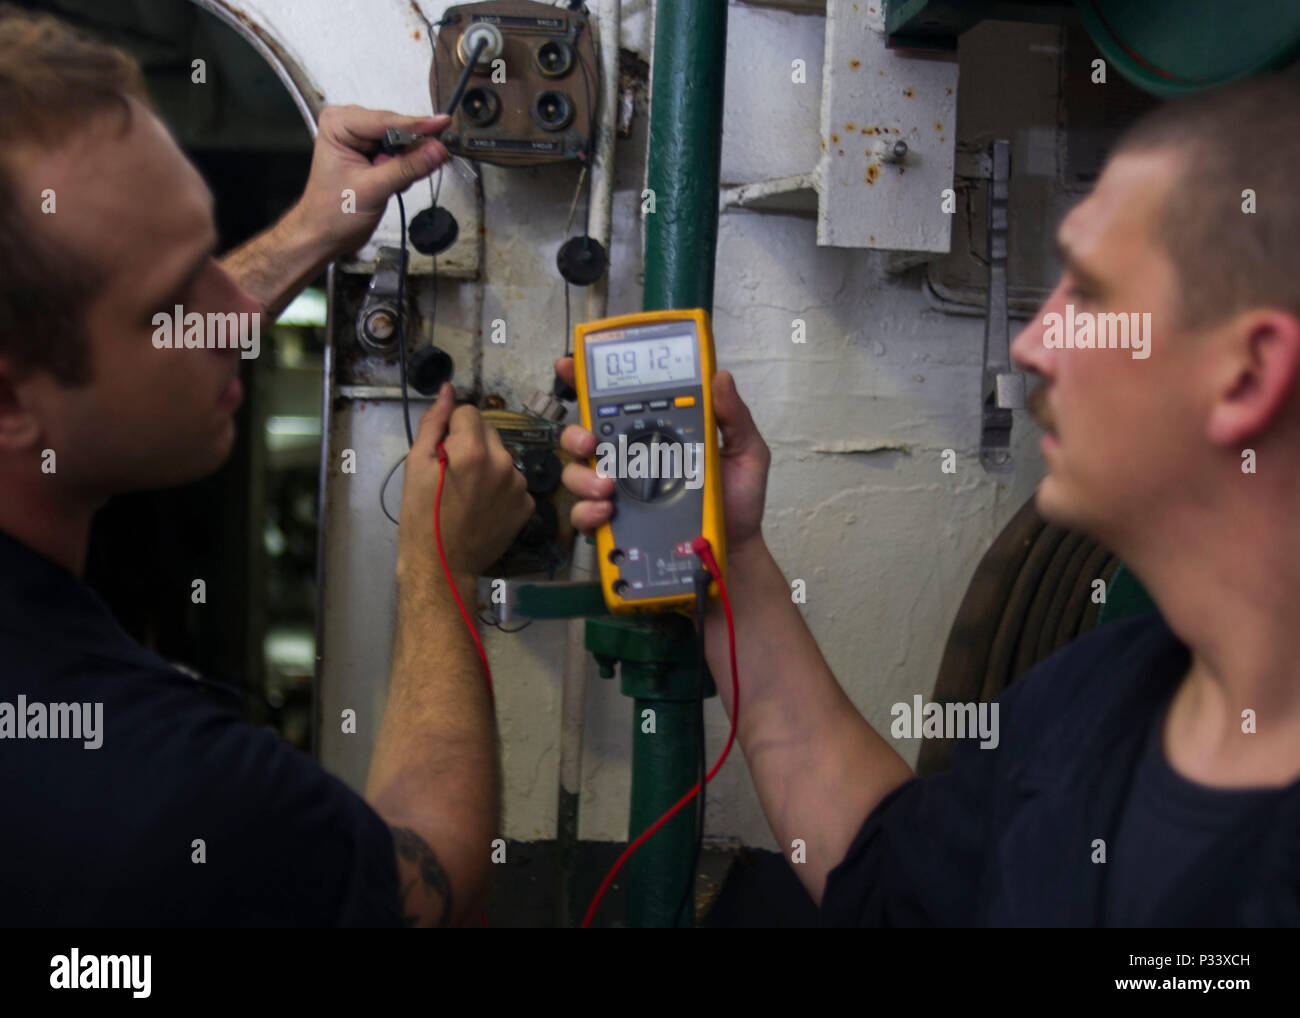 160829-N-RG522-055 ATLANTIC OCEAN (Aug. 29, 2016) Interior Communications Electrician 3rd Class Jason Goodpaster, left, from Lawrenceburg, Kentucky,  and Interior Communications Electrician Seaman Christopher Bane, from Minneapolis, Minnesota, perform preventative maintenance on sound-powered phone systems aboard the aircraft carrier USS George Washington (CVN 73). George Washington, homeported in Norfolk, is underway conducting carrier qualifications in the Atlantic Ocean.  (U.S. Navy photo by Mass Communication Specialist 3rd Class Jonathan Price) Stock Photo